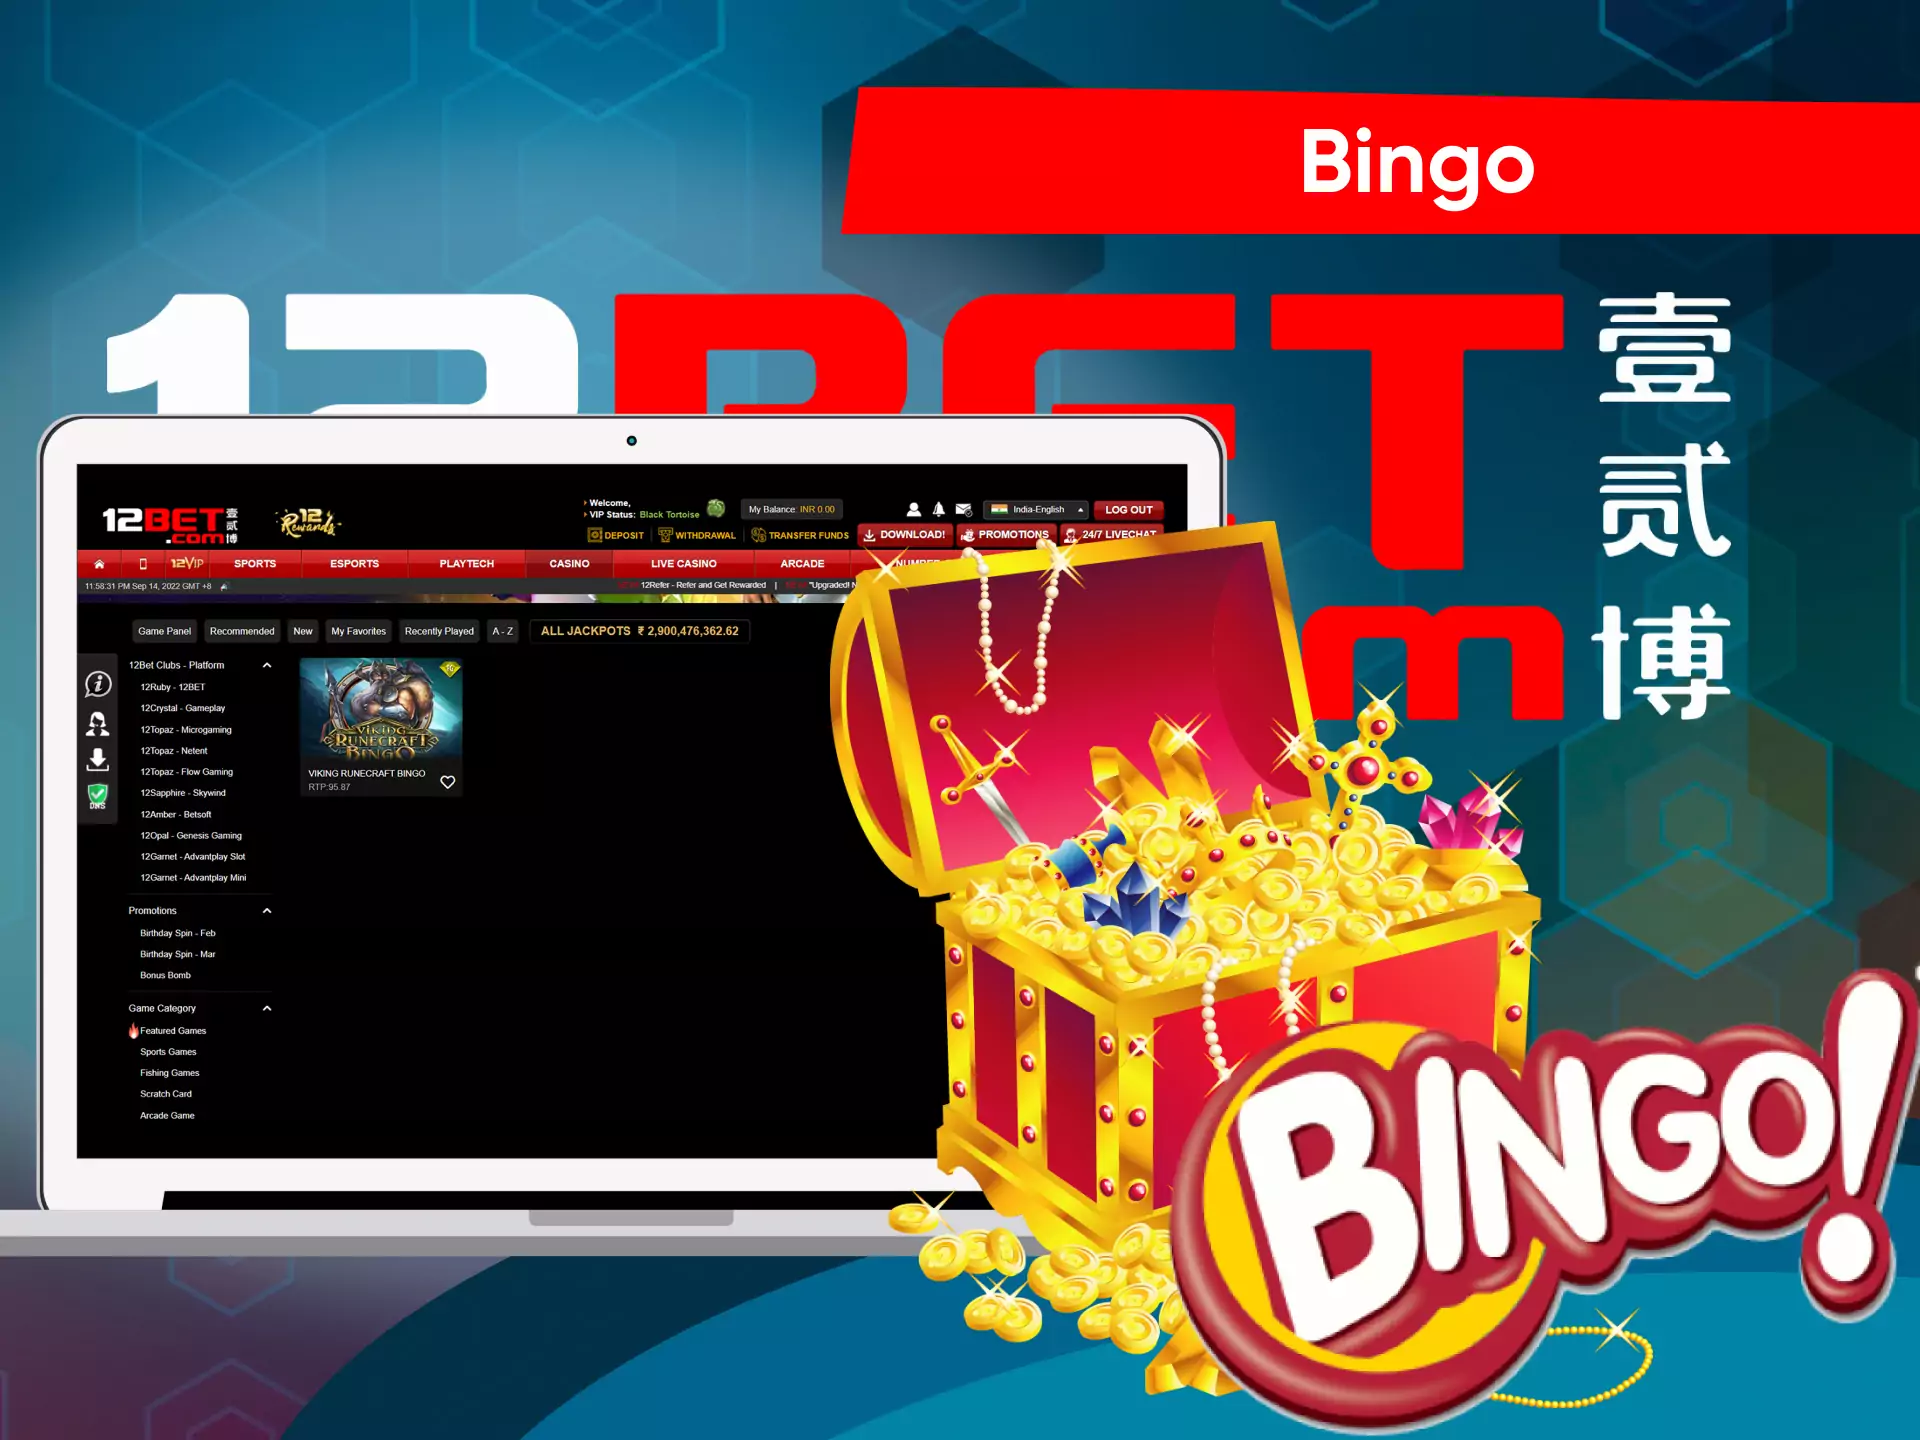 Besides casino games and betting, you can enjoy bingo on 12bet.